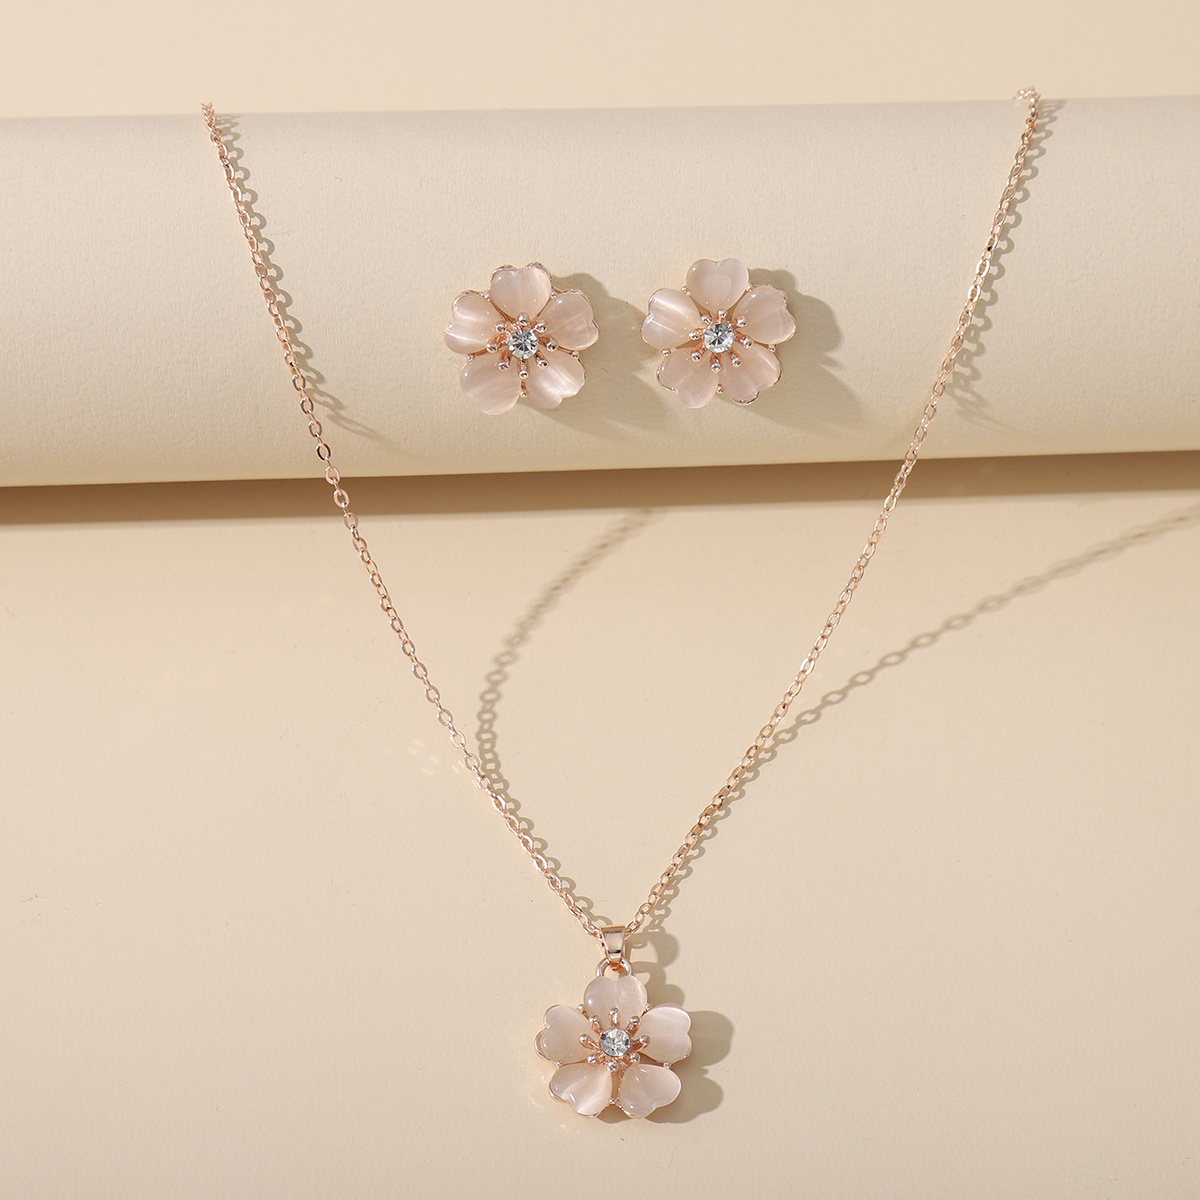 Cherry Blossom Pendant Necklace Earrings Sets